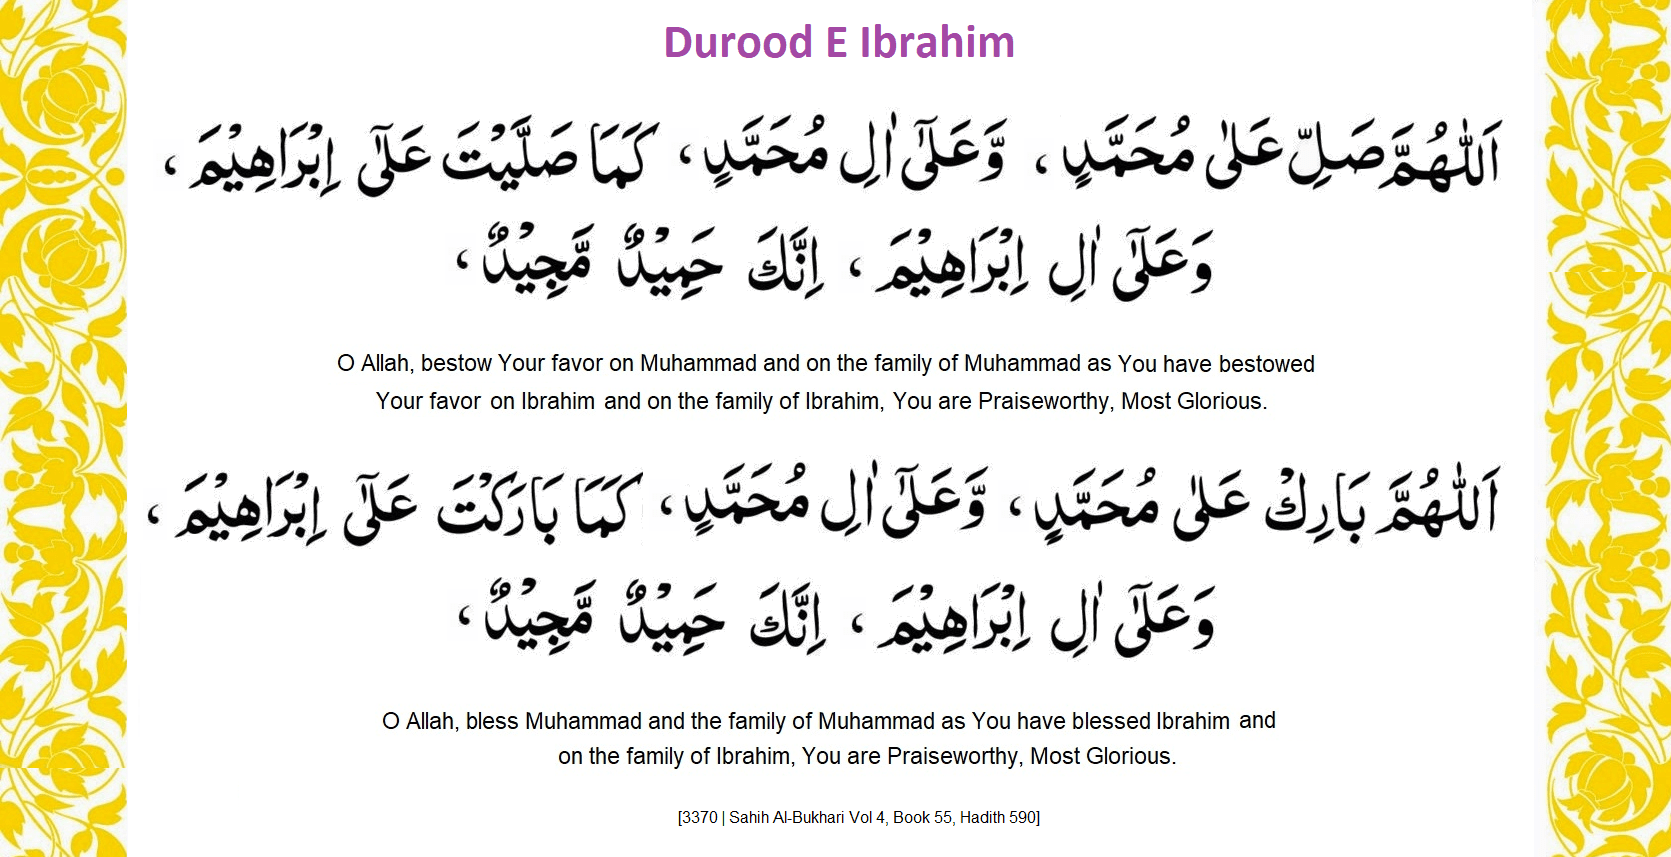 DuroodEIbrahim 1 - How Often Do You Send Blessings Upon The Prophet (SAWS)?